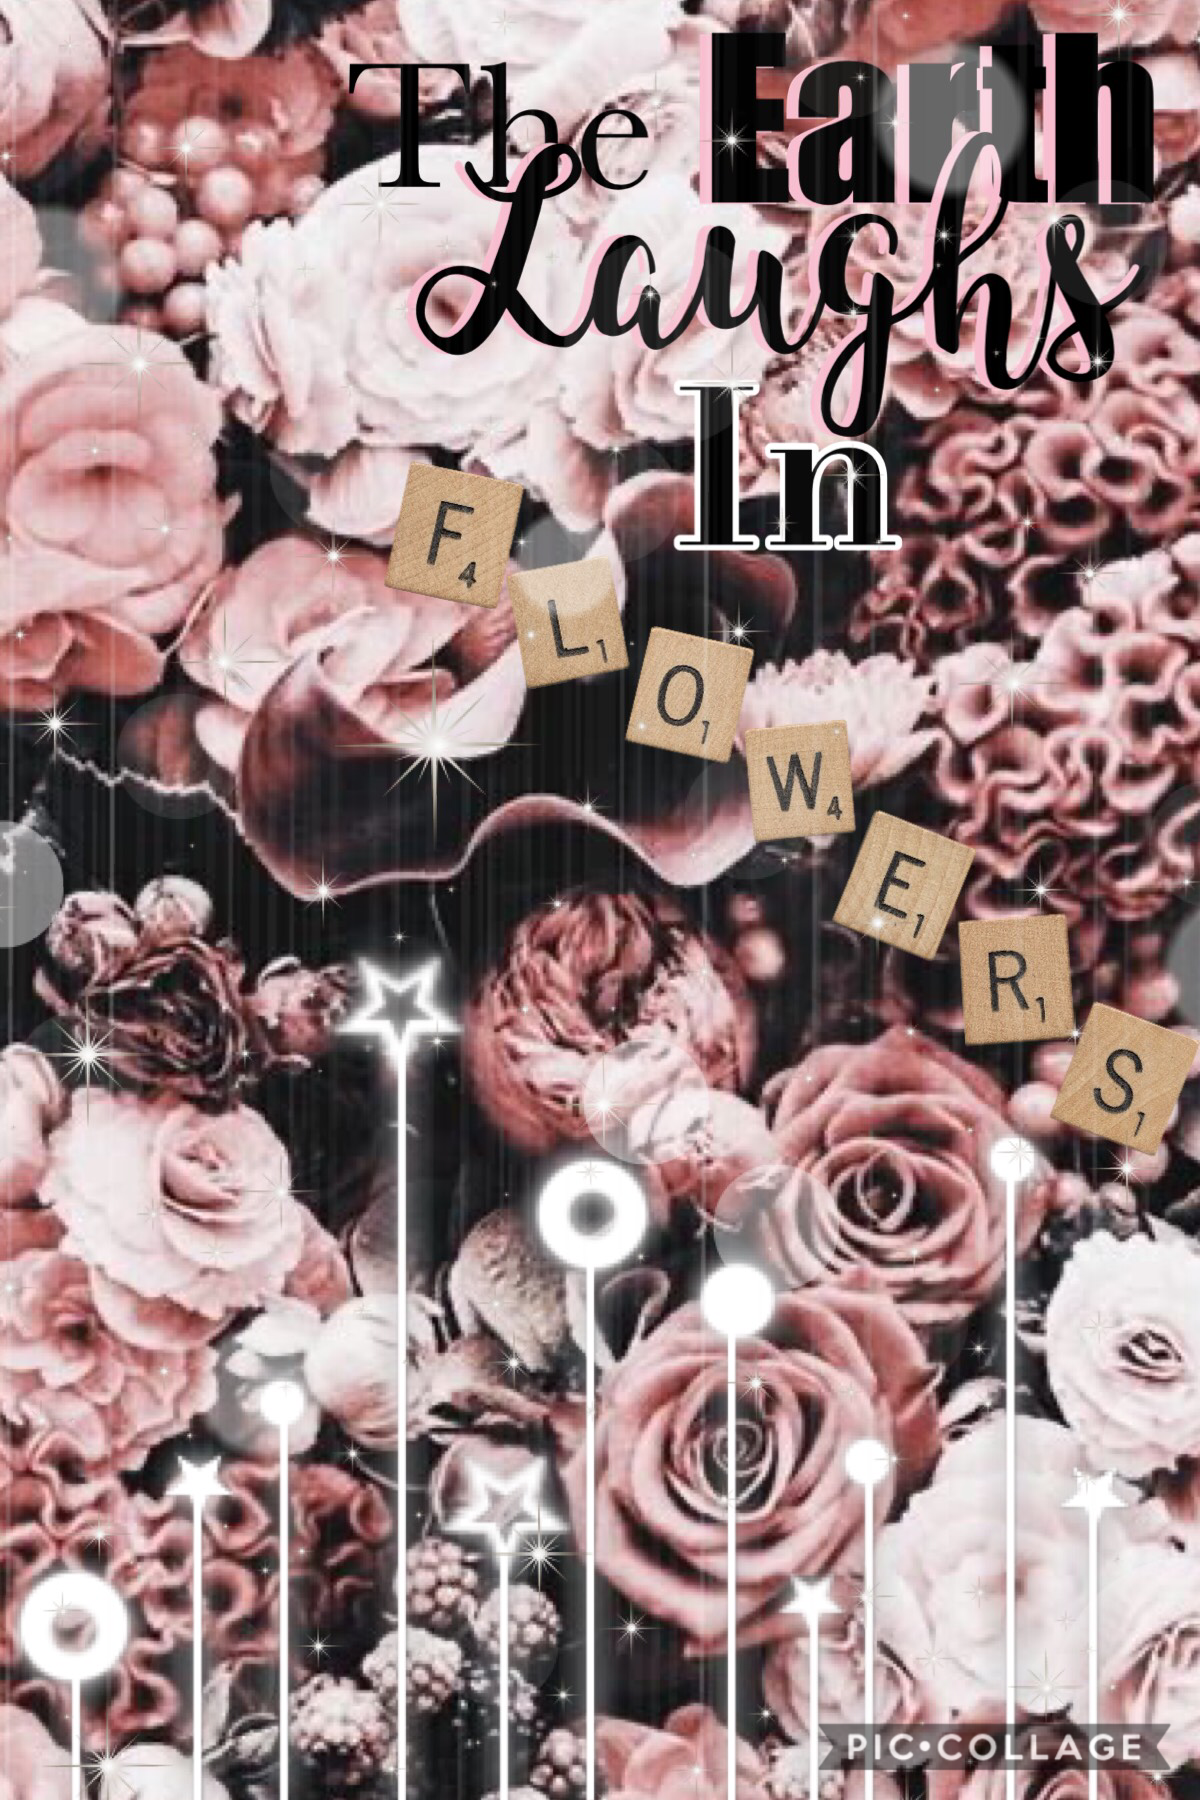 ✨TAP✨
I love flowers and I think this is really cool looking
With all of the pngs and stuff